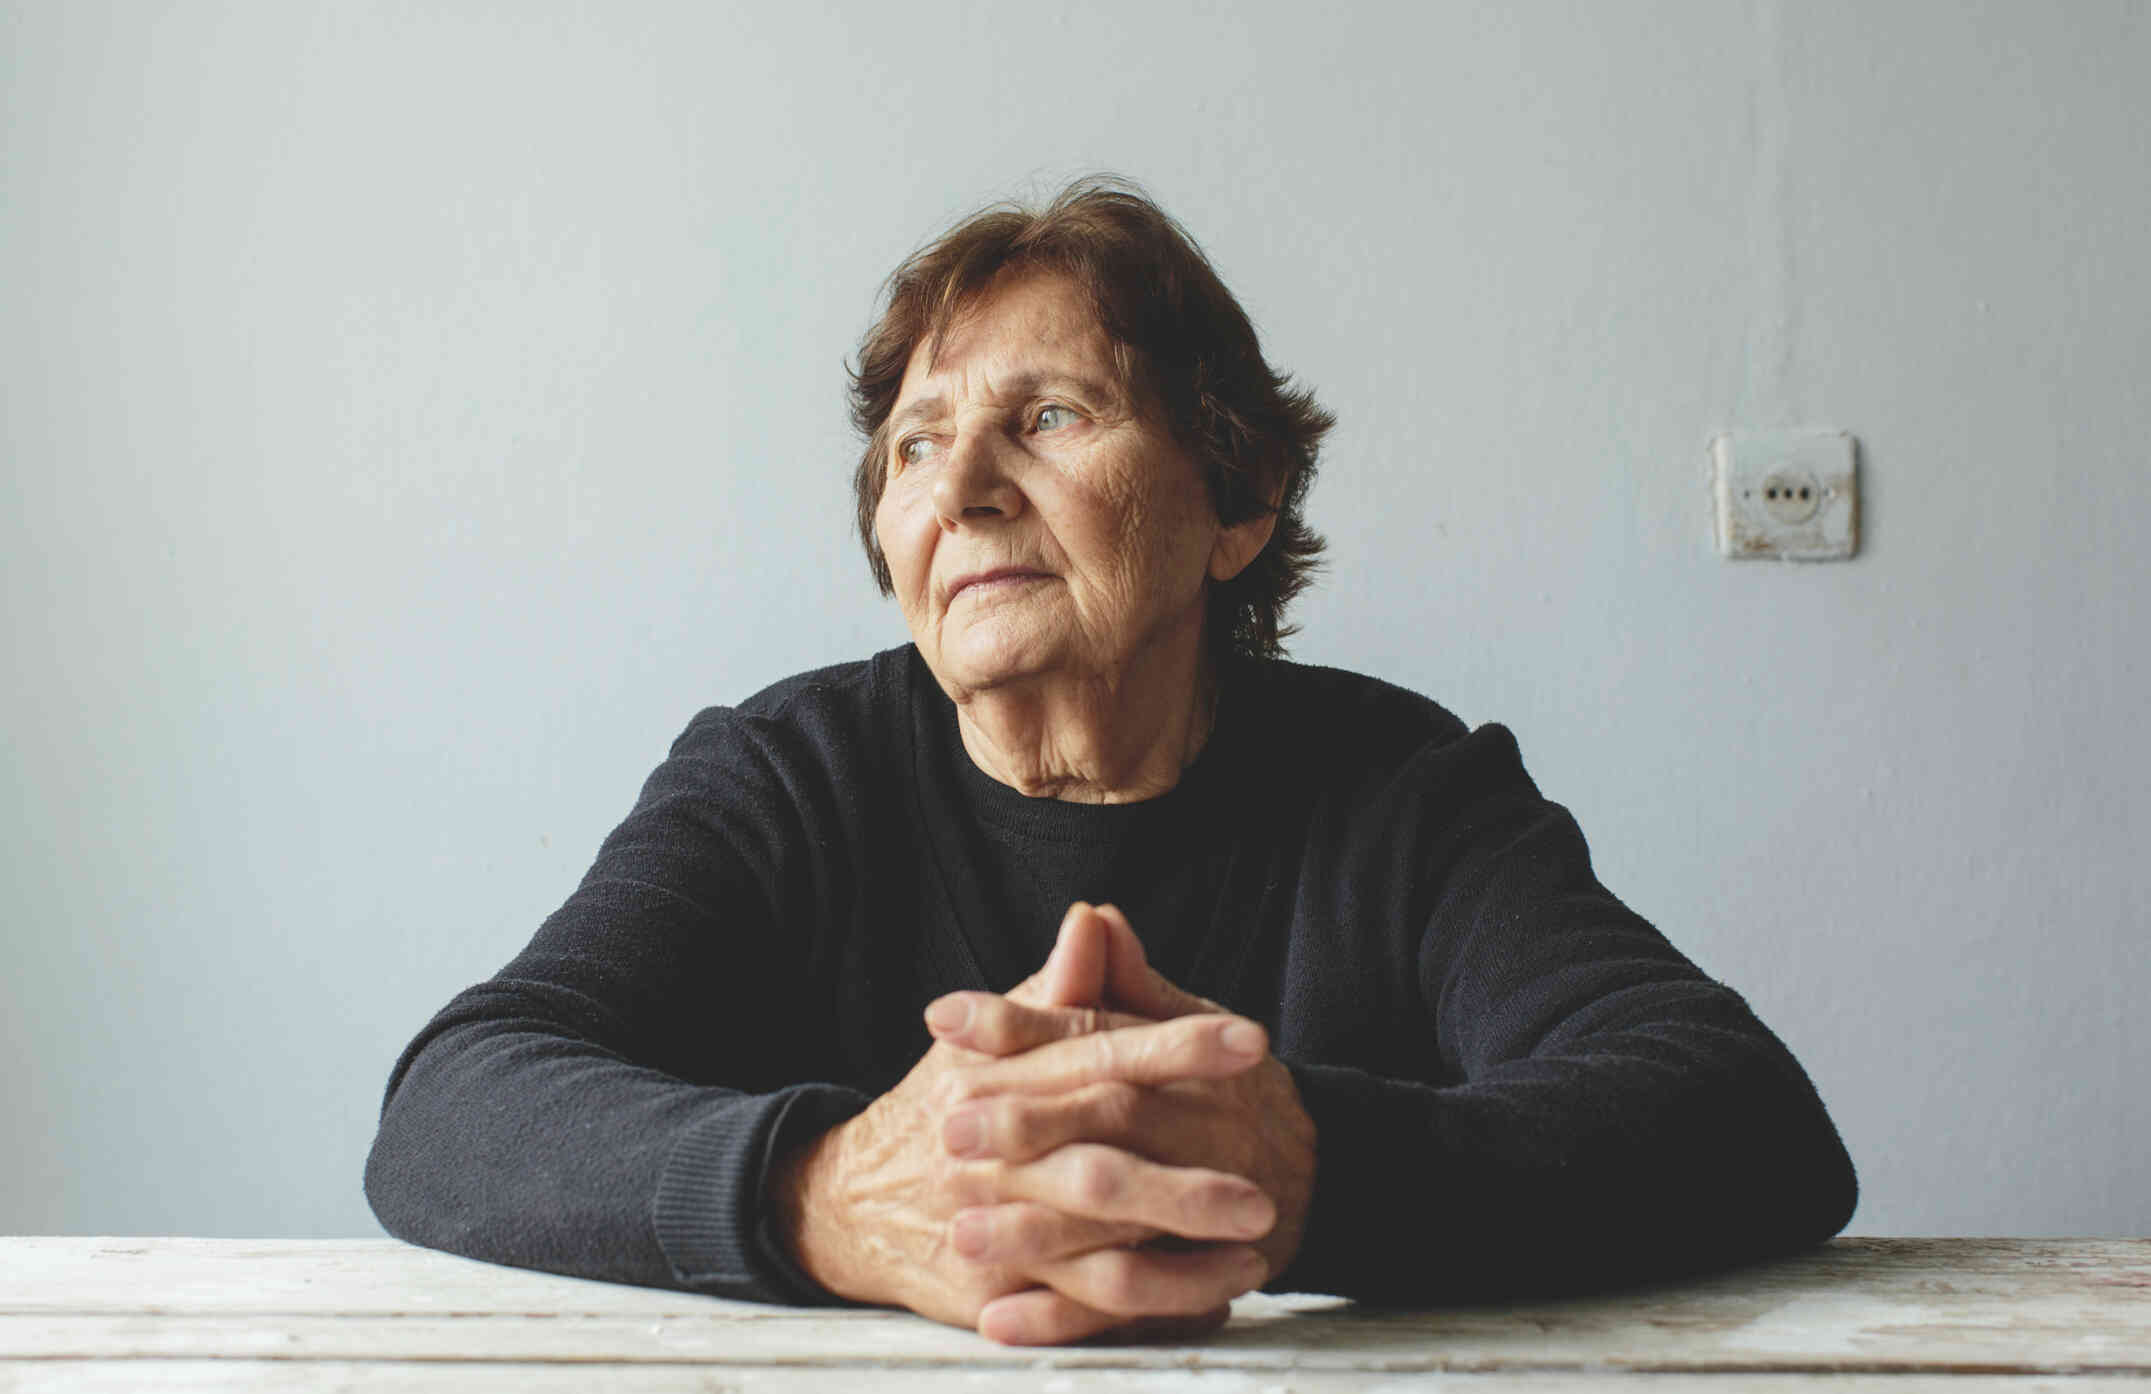 A mature woman in a black long sleeve shirt sits at a table and gazes off sadly while clasping her hands together.